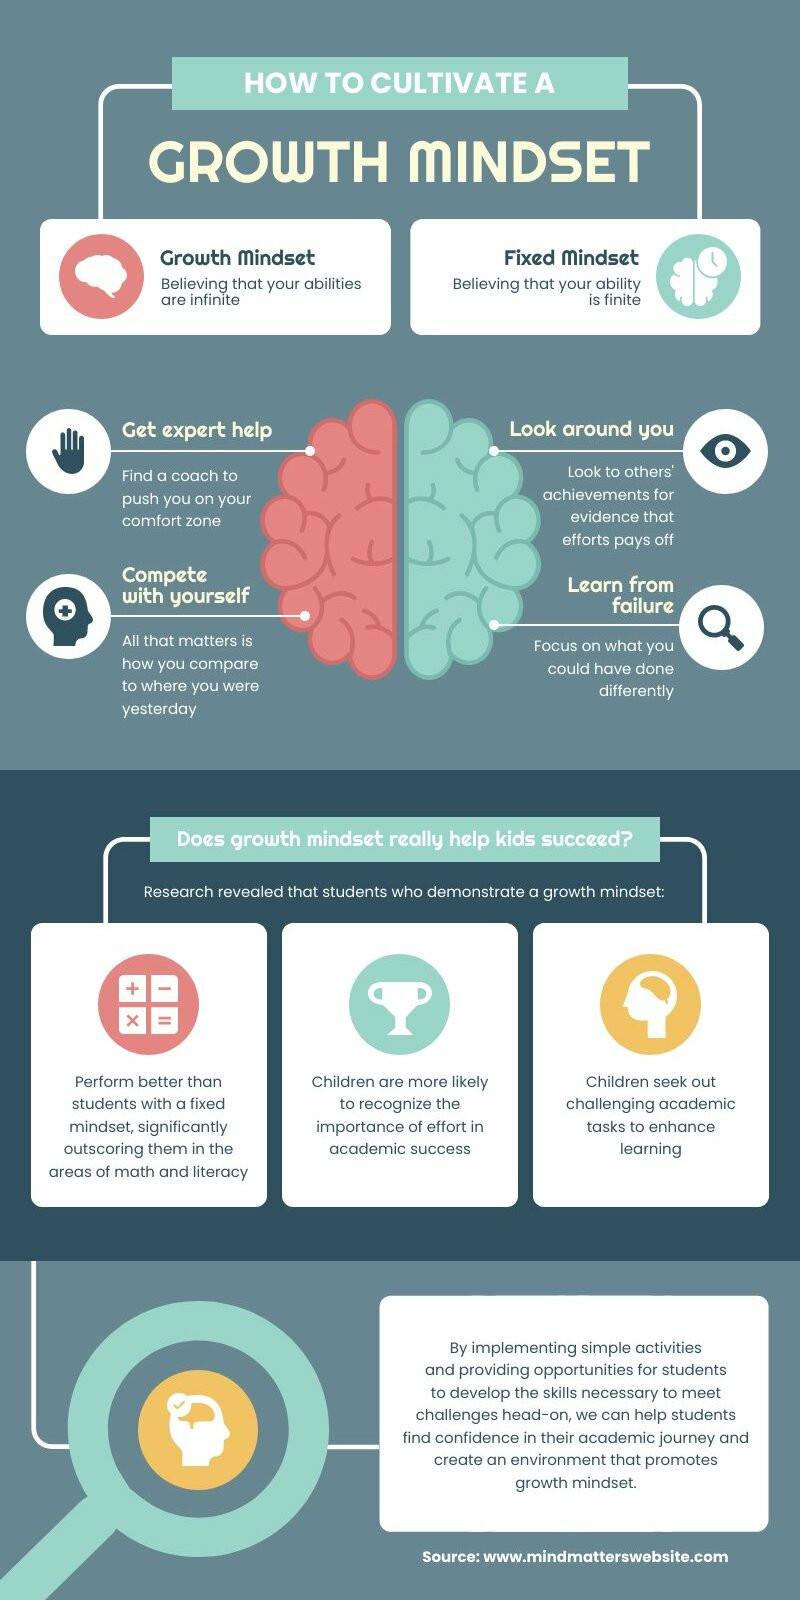 How to Cultivate a Growth Mindset